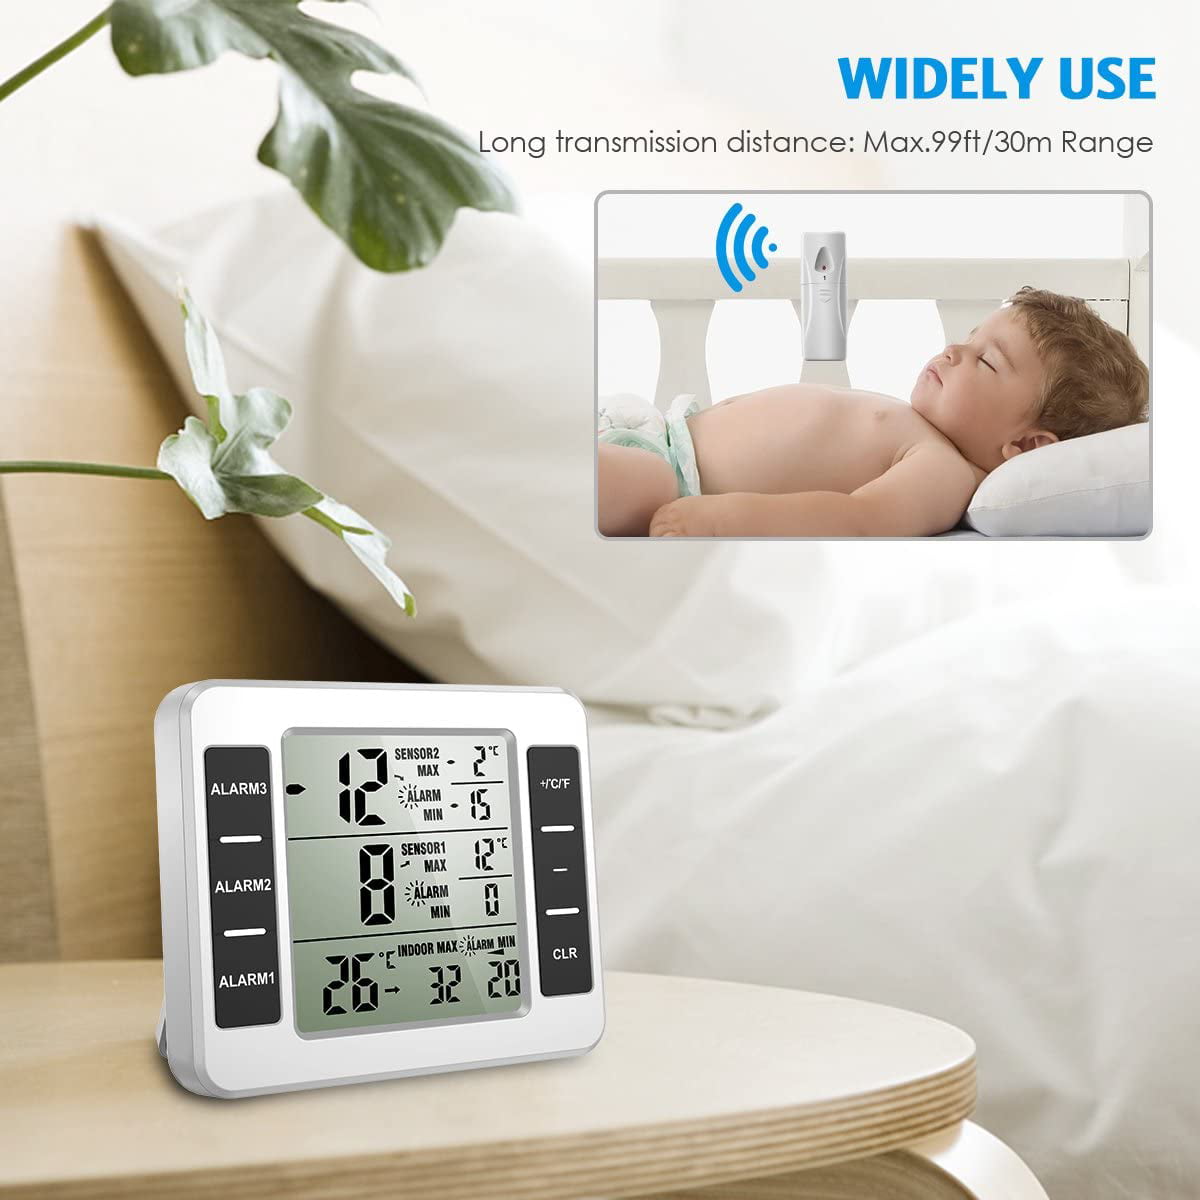 Audible Alarm Temperature Gauge for Freezer Kitchen Home - China  Refrigerator Thermometer, Freezer Thermometer